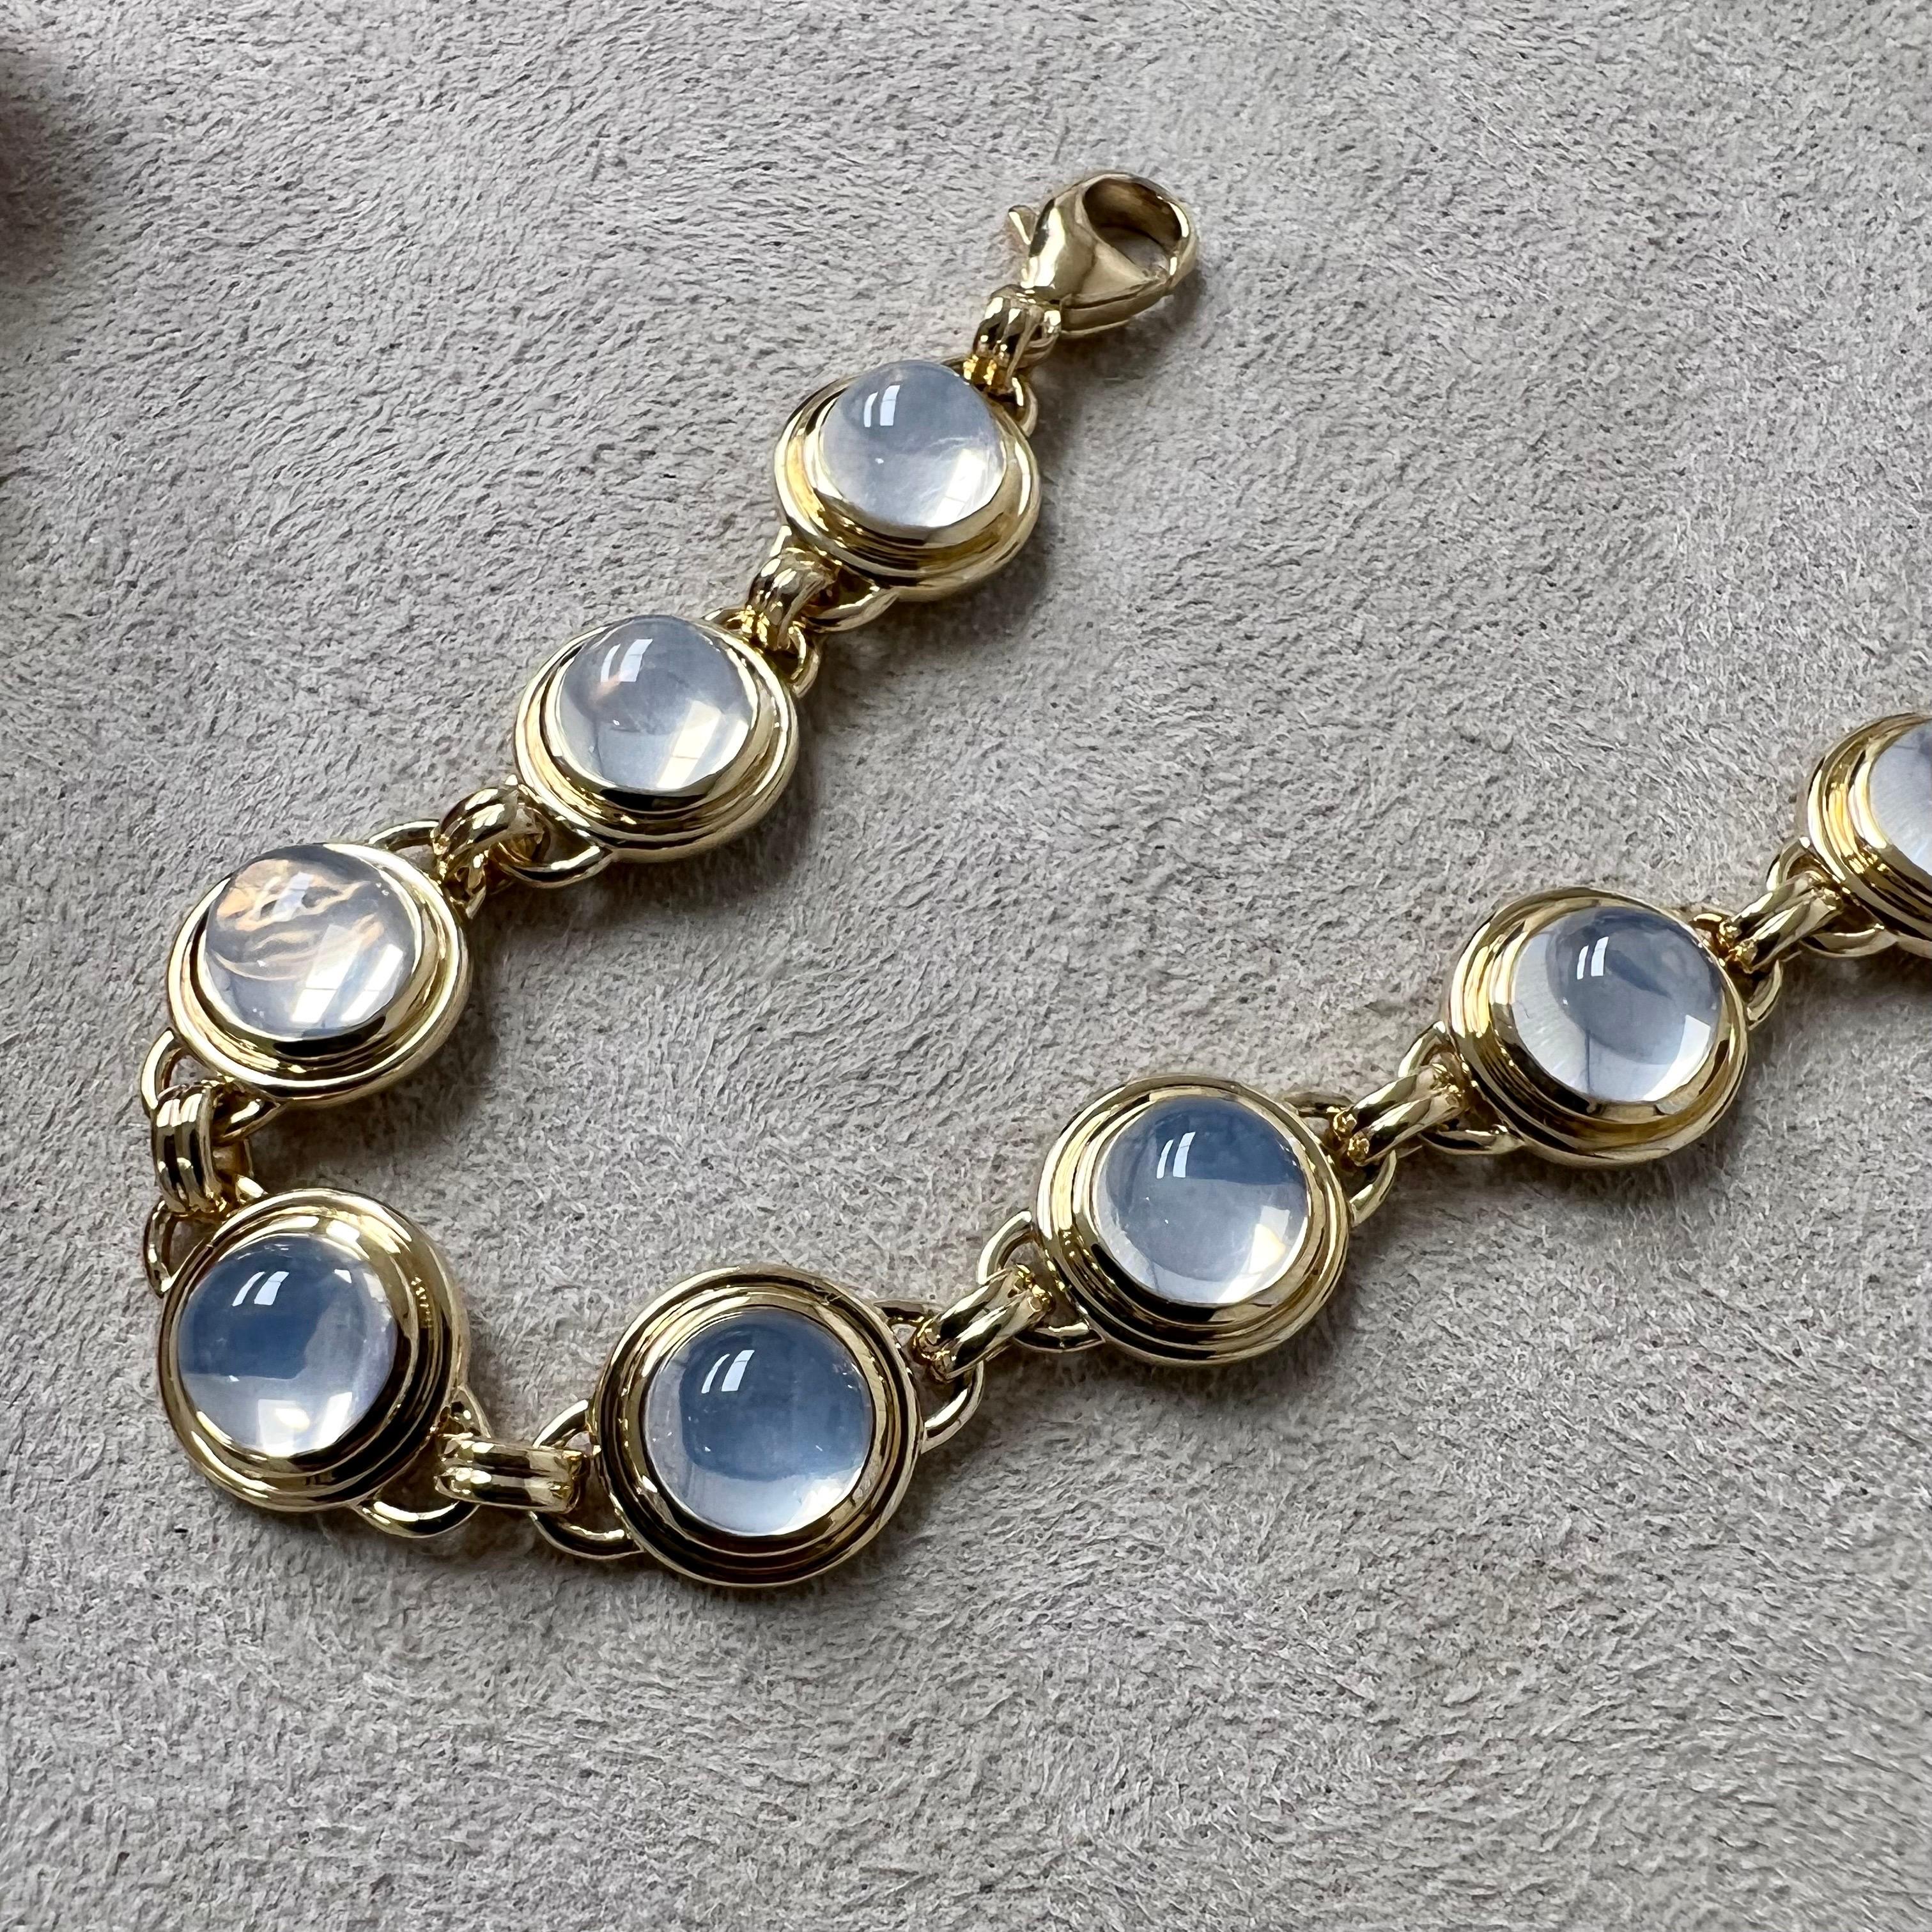 Syna Yellow Gold Moon Quartz Bracelet In New Condition For Sale In Fort Lee, NJ